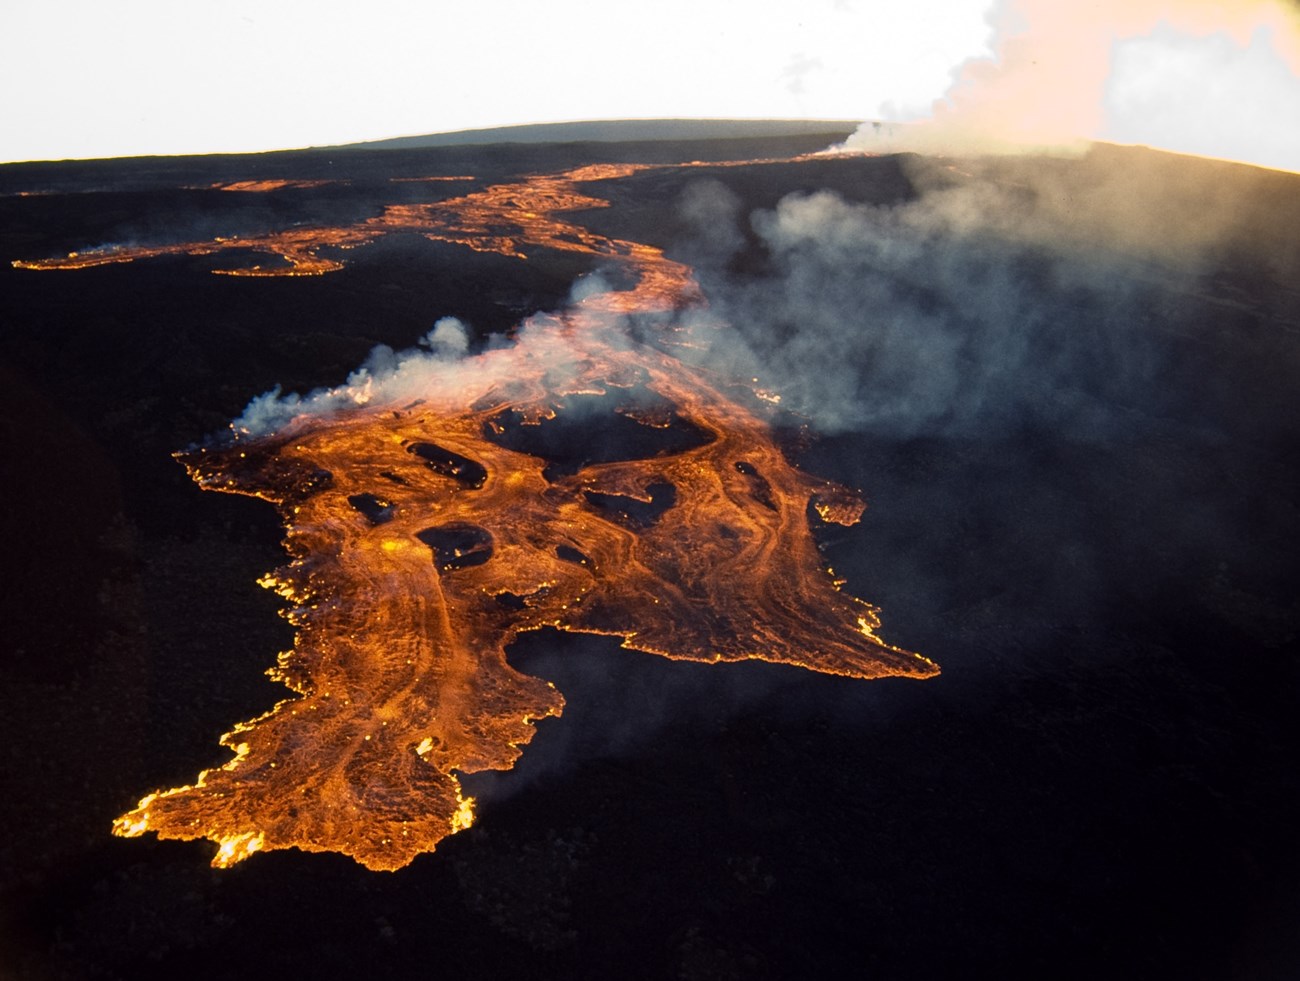 Photo of molten lava flowing across the ground.